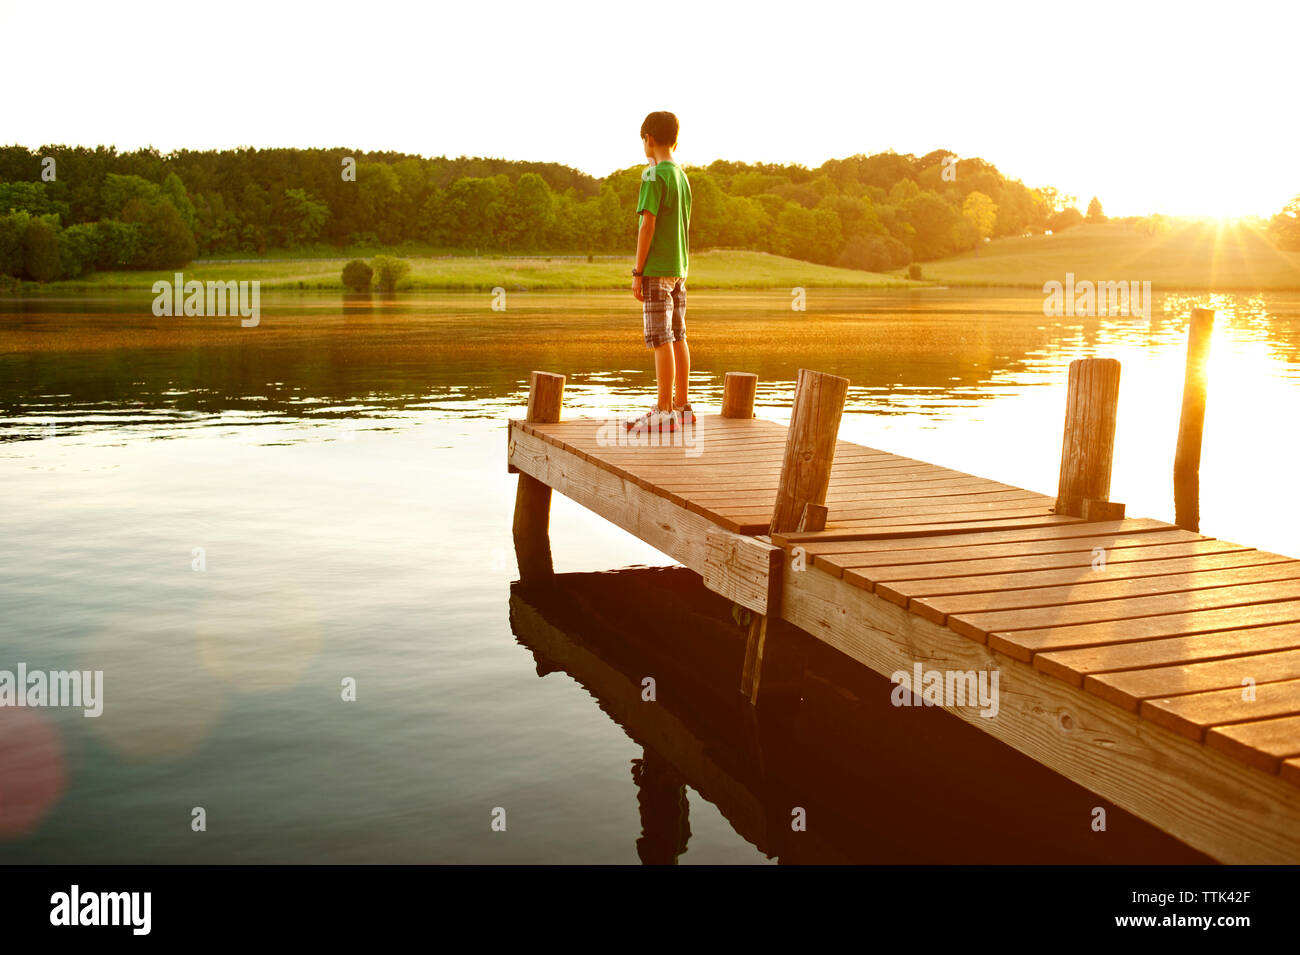 Boy standing on jetty over lake during sunny day Stock Photo